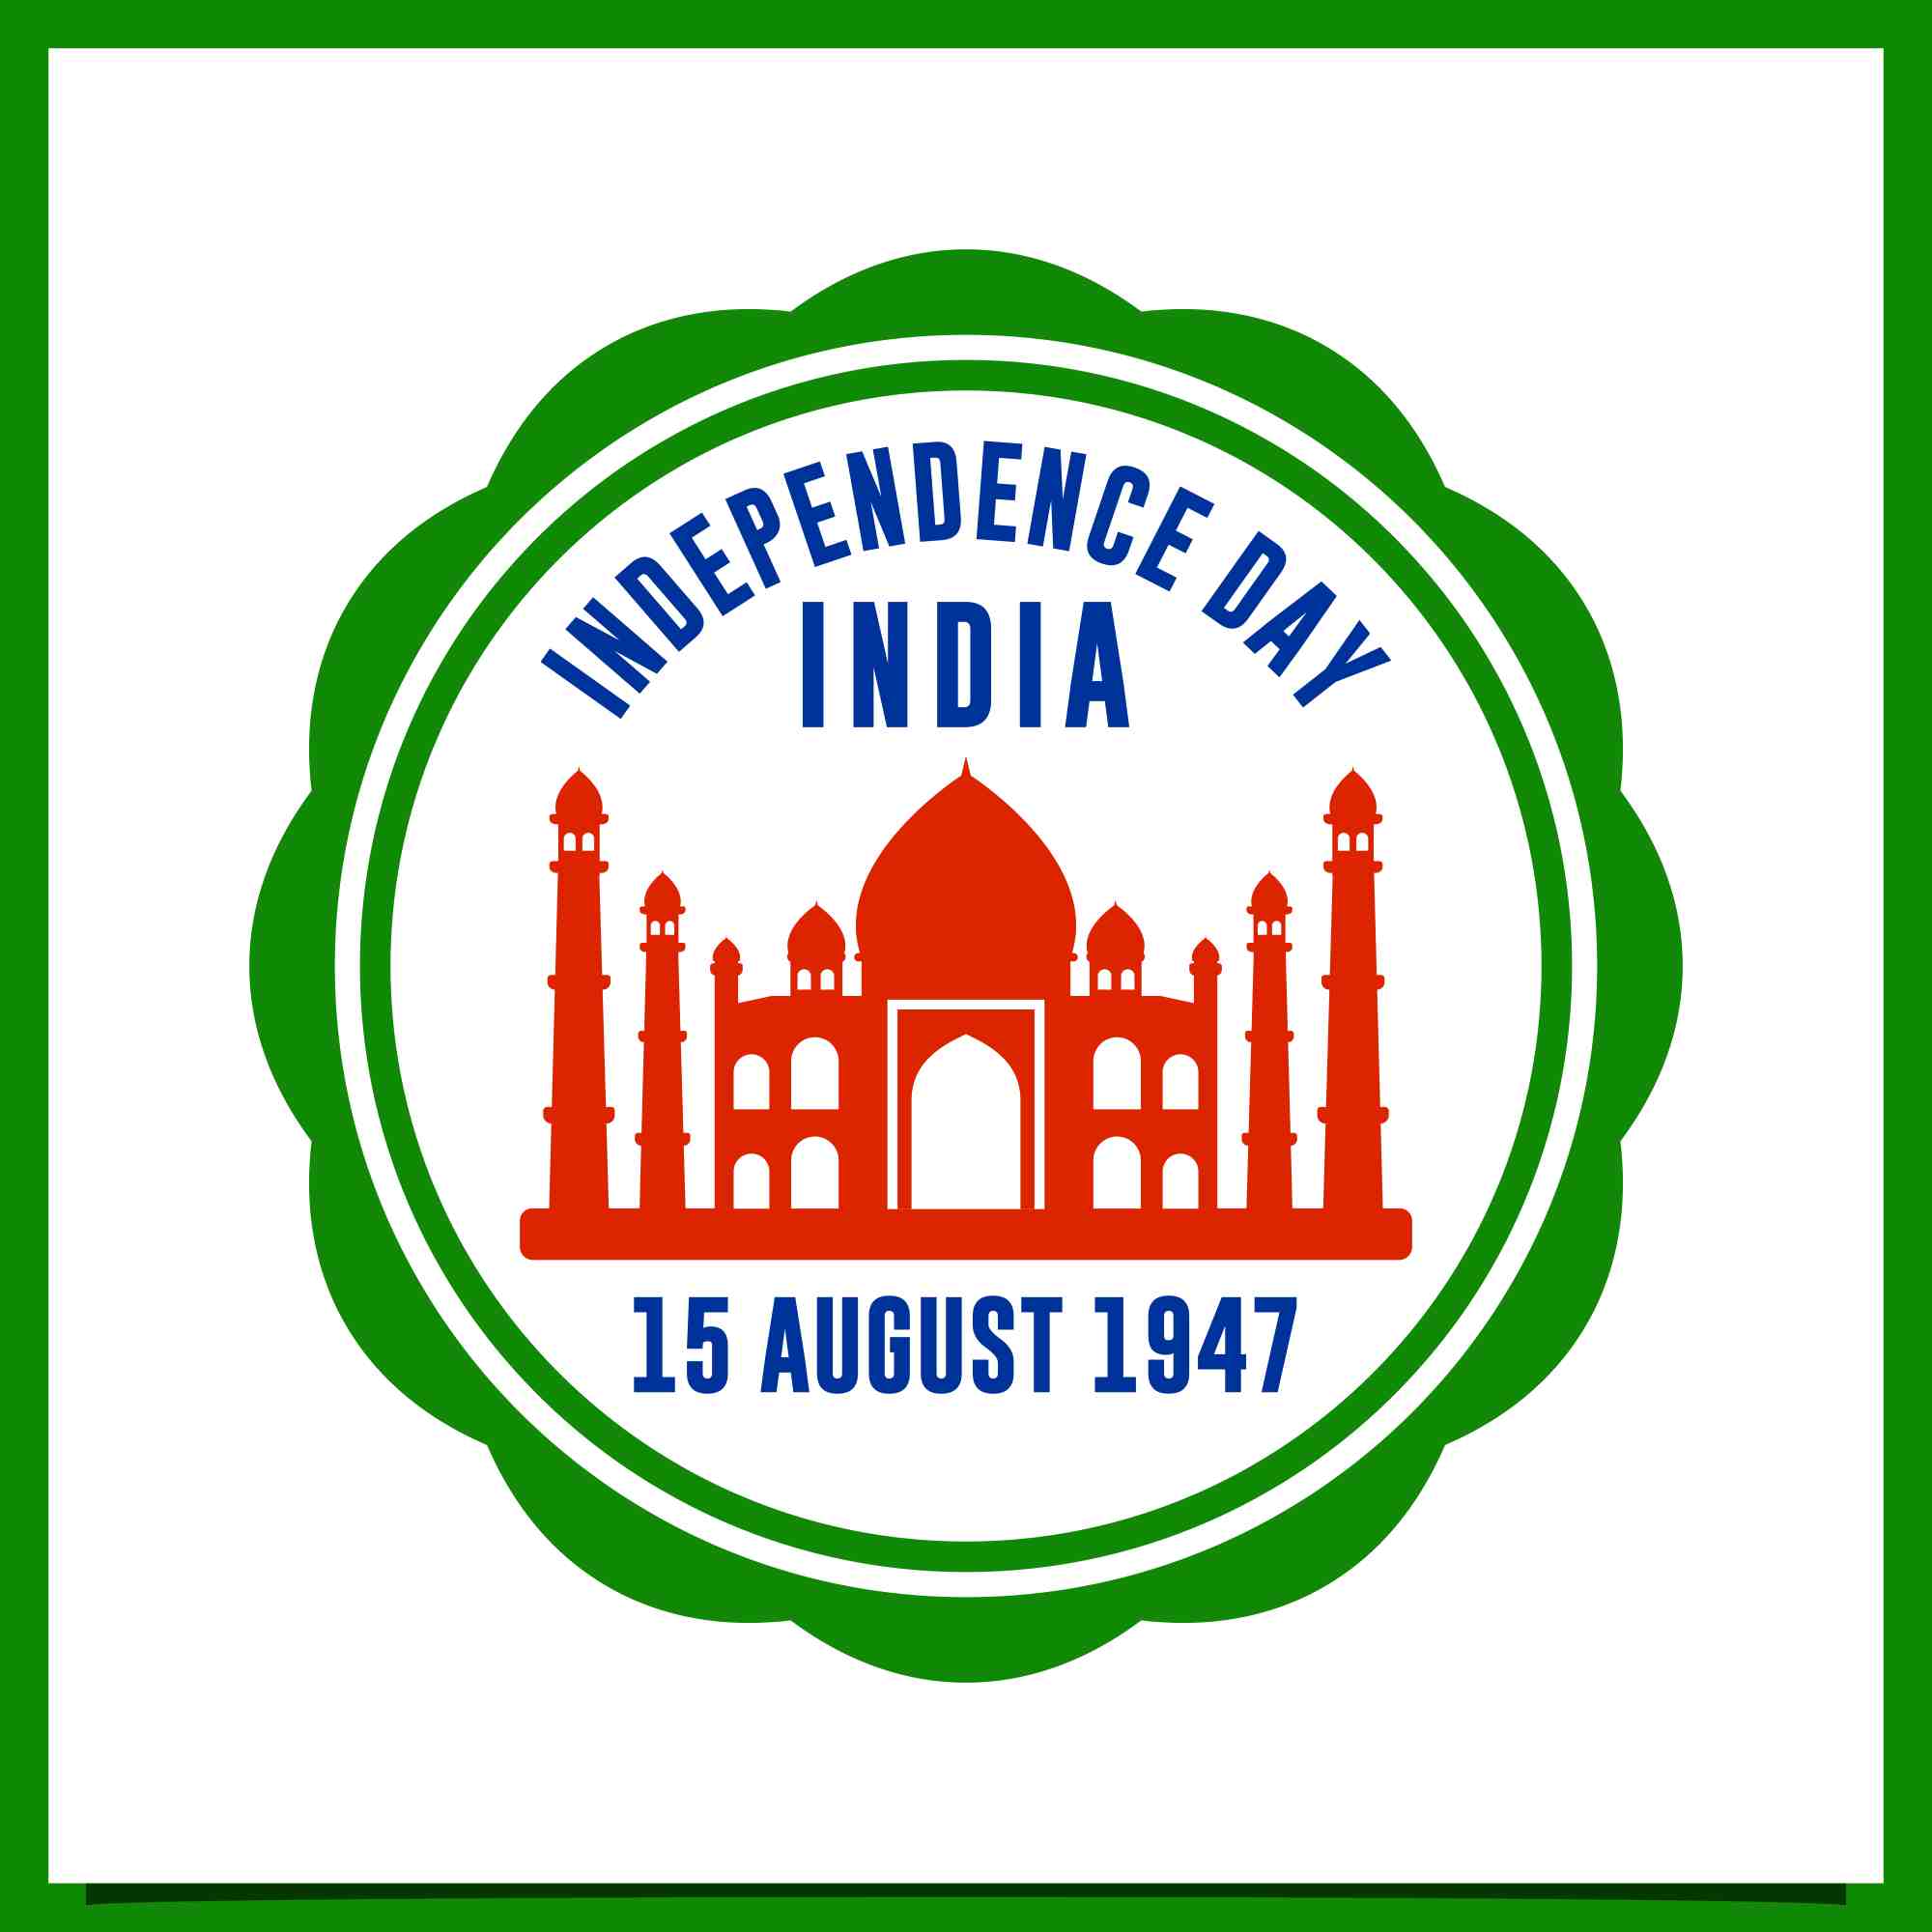 13 Independence day india 15 august badge stamps collection - $6 preview image.